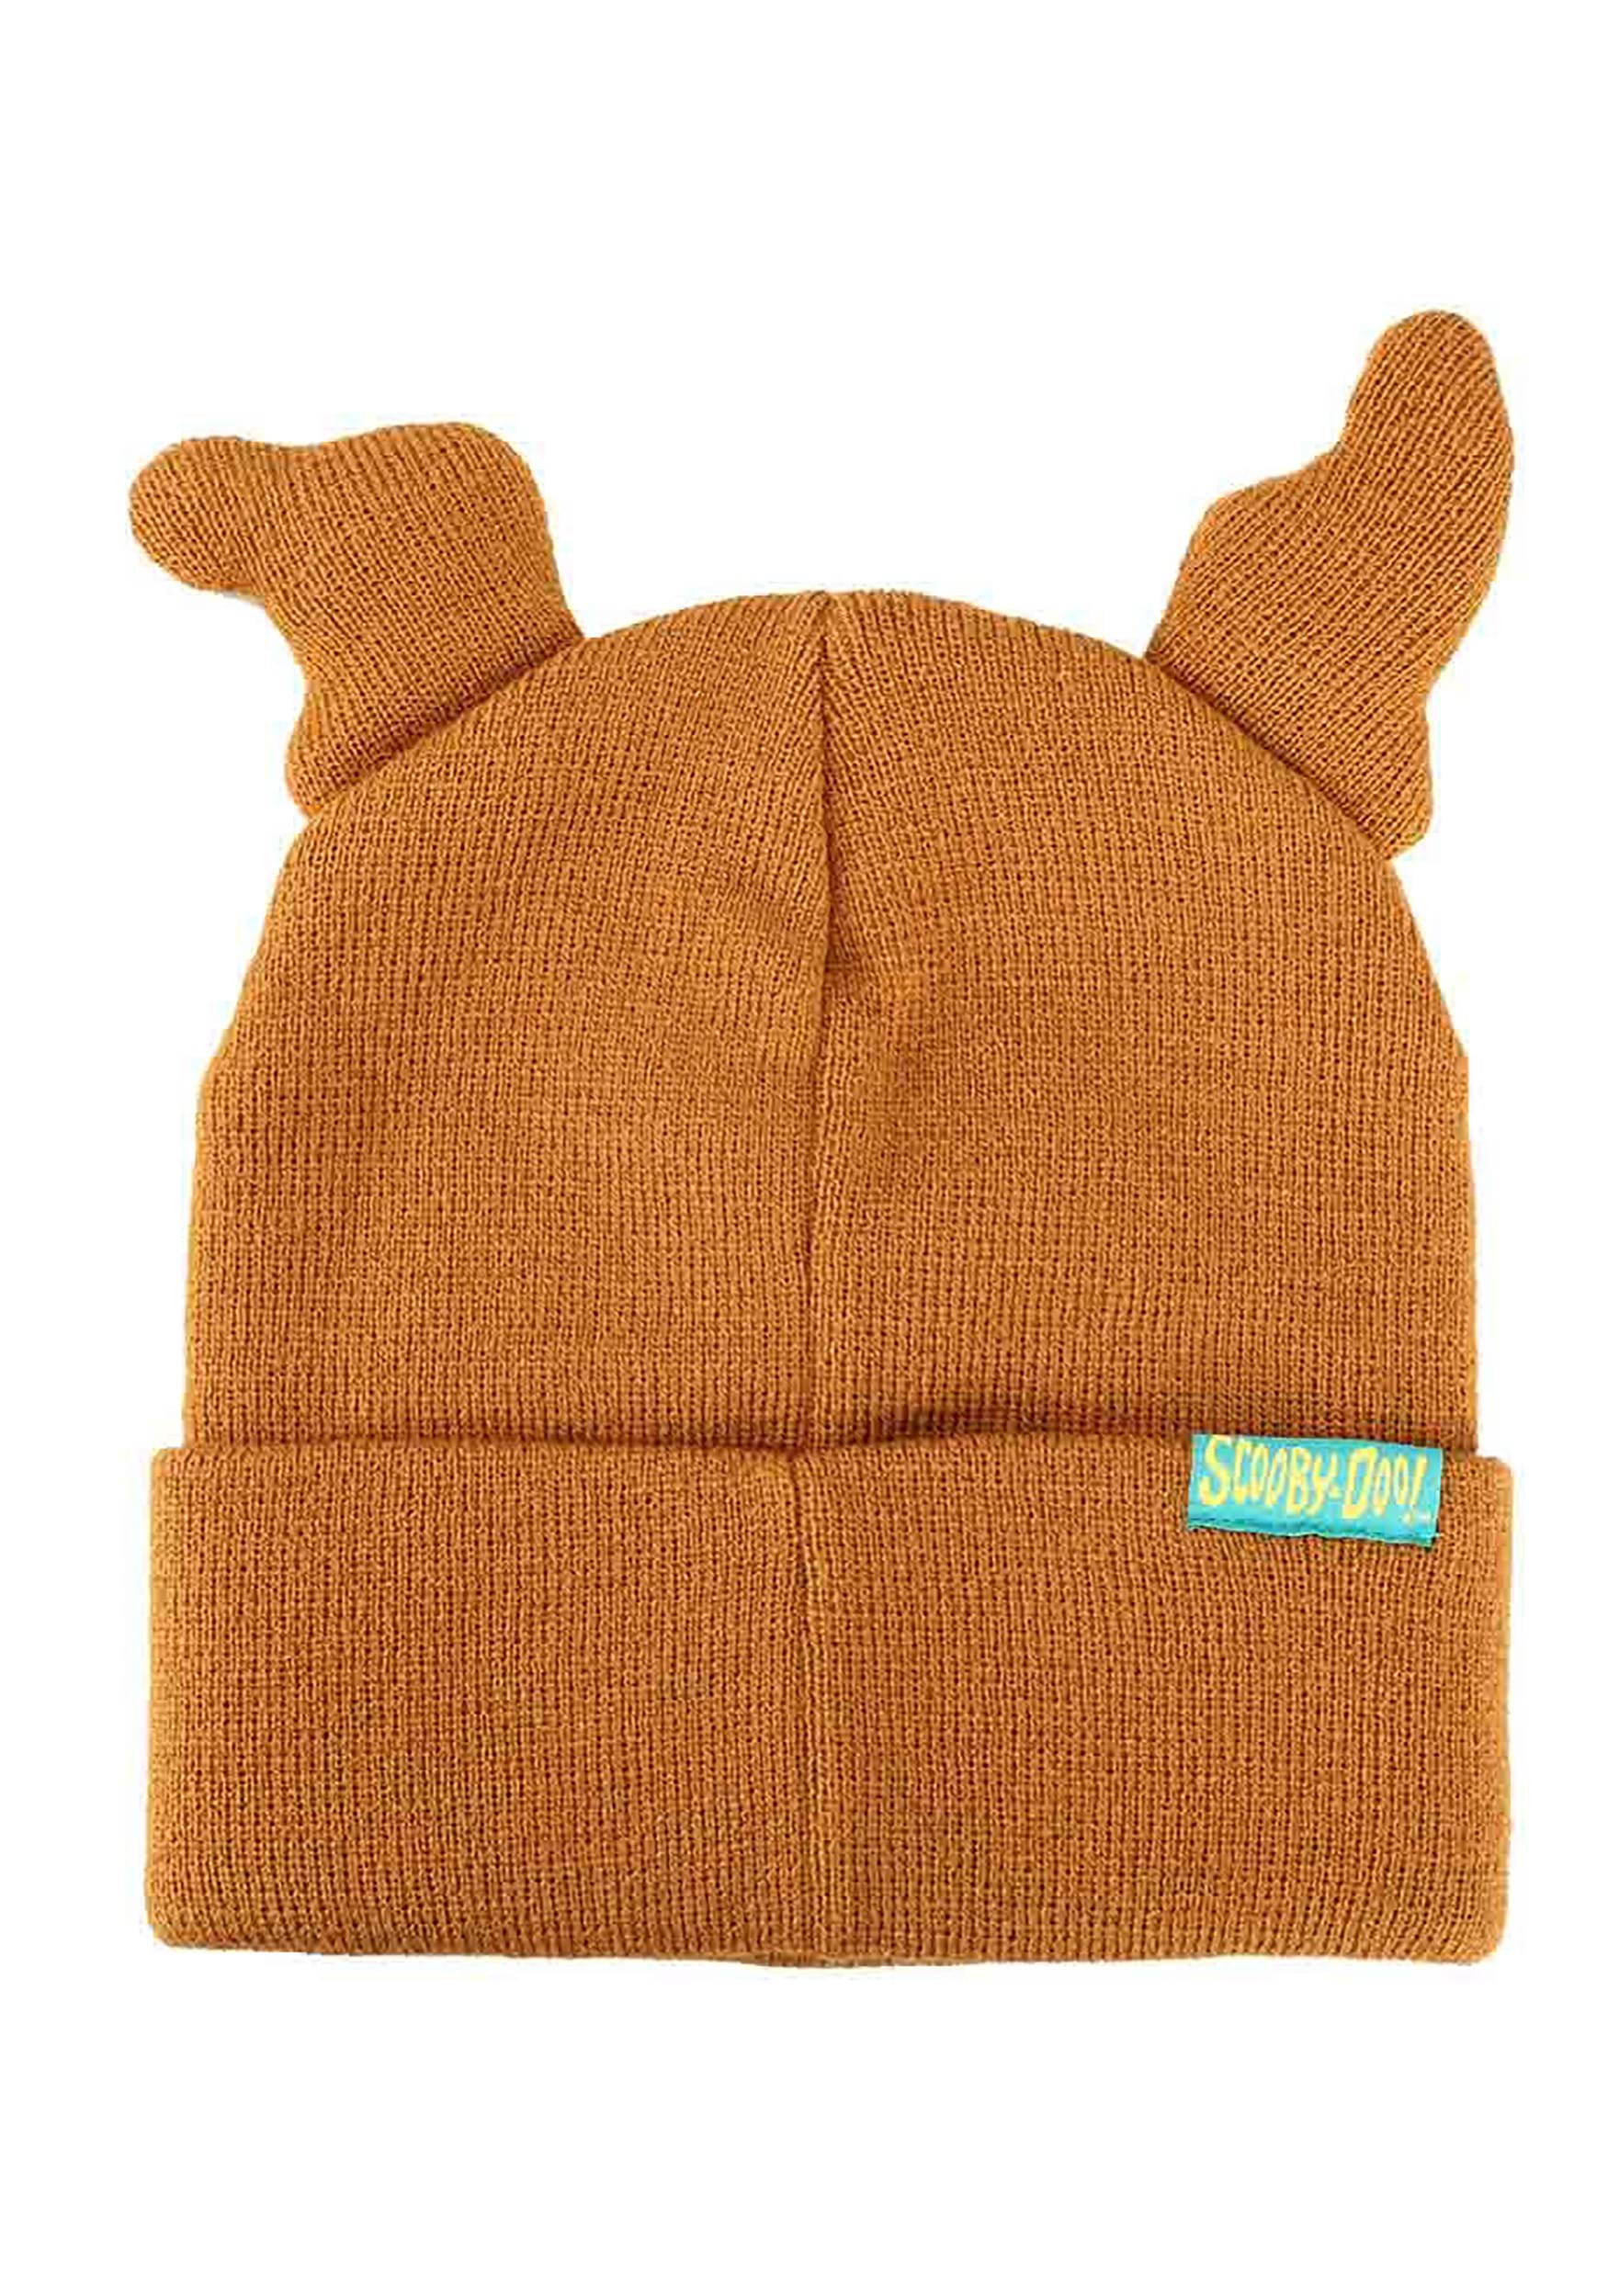 3D Scooby Doo Plush Ears Embroidered Beanie , Scooby Doo Apparel